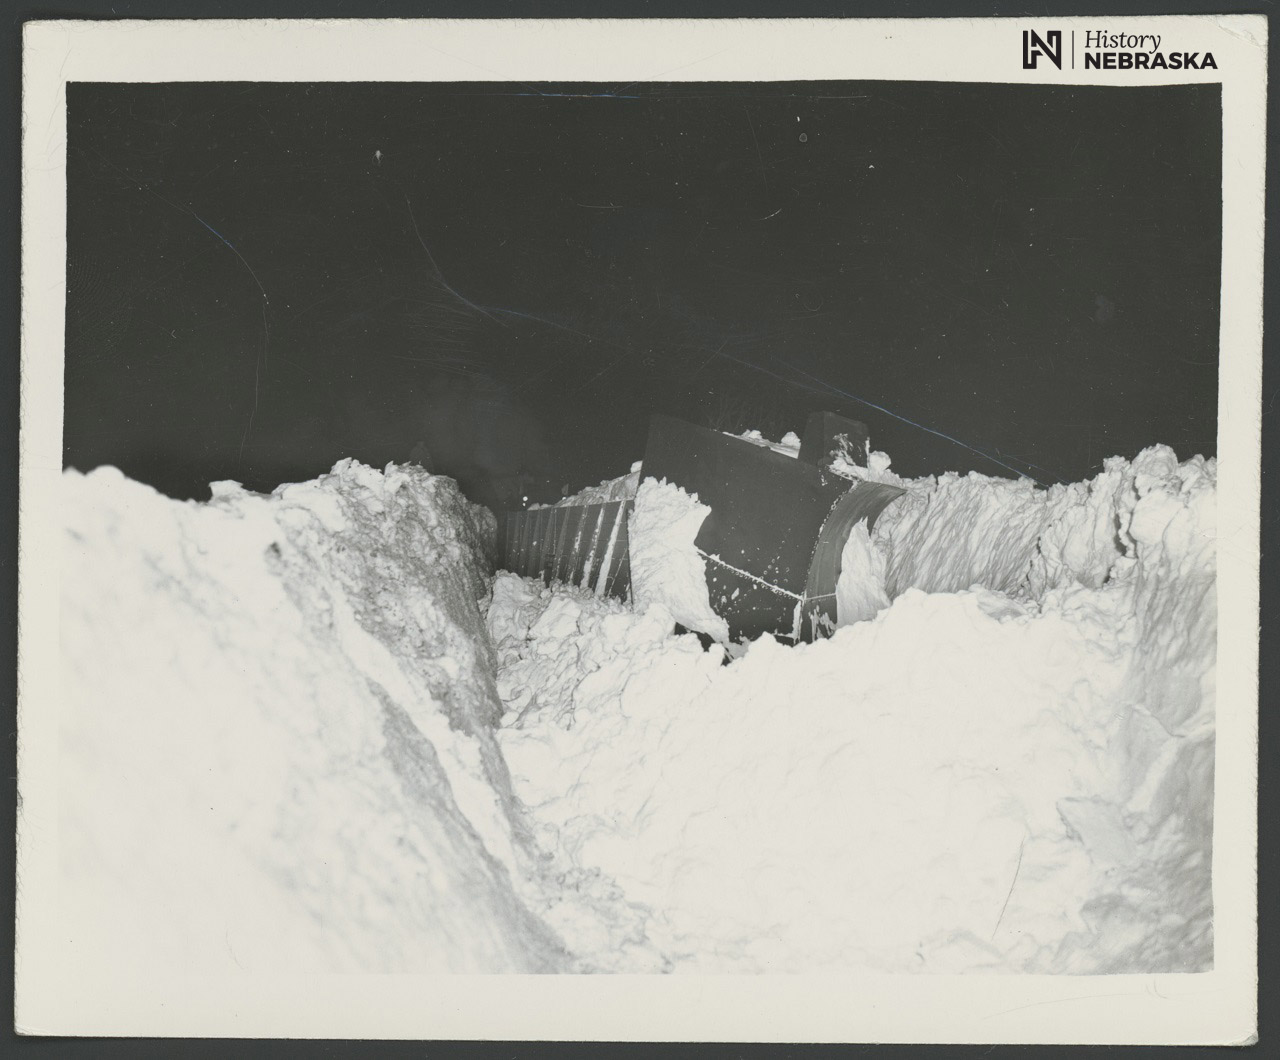 uge snowdrifts are visible on either side of a plow being used to clear railroad tracks during the Blizzard of 1949